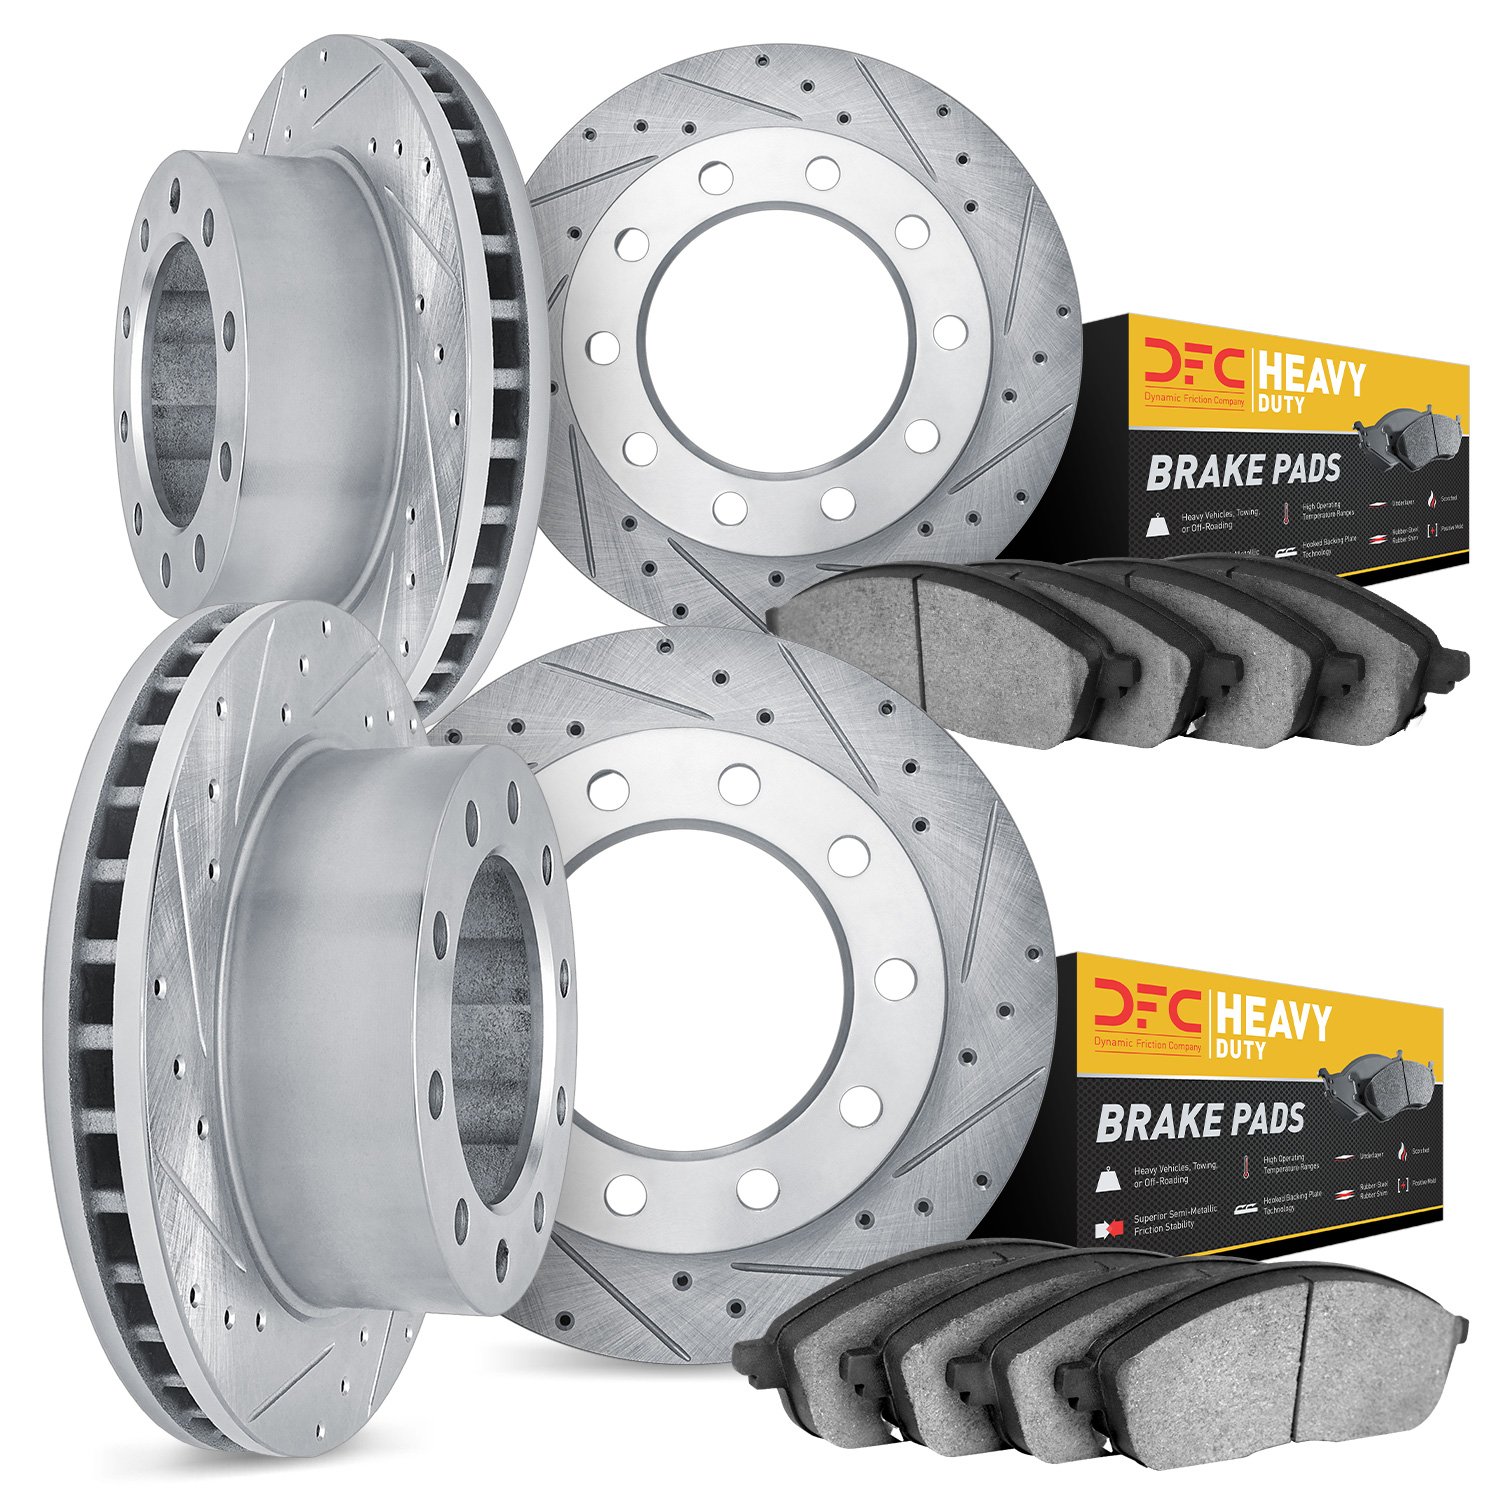 7204-99058 Drilled/Slotted Rotors w/Heavy-Duty Brake Pads Kit [Silver], 2006-2019 Ford/Lincoln/Mercury/Mazda, Position: Front an